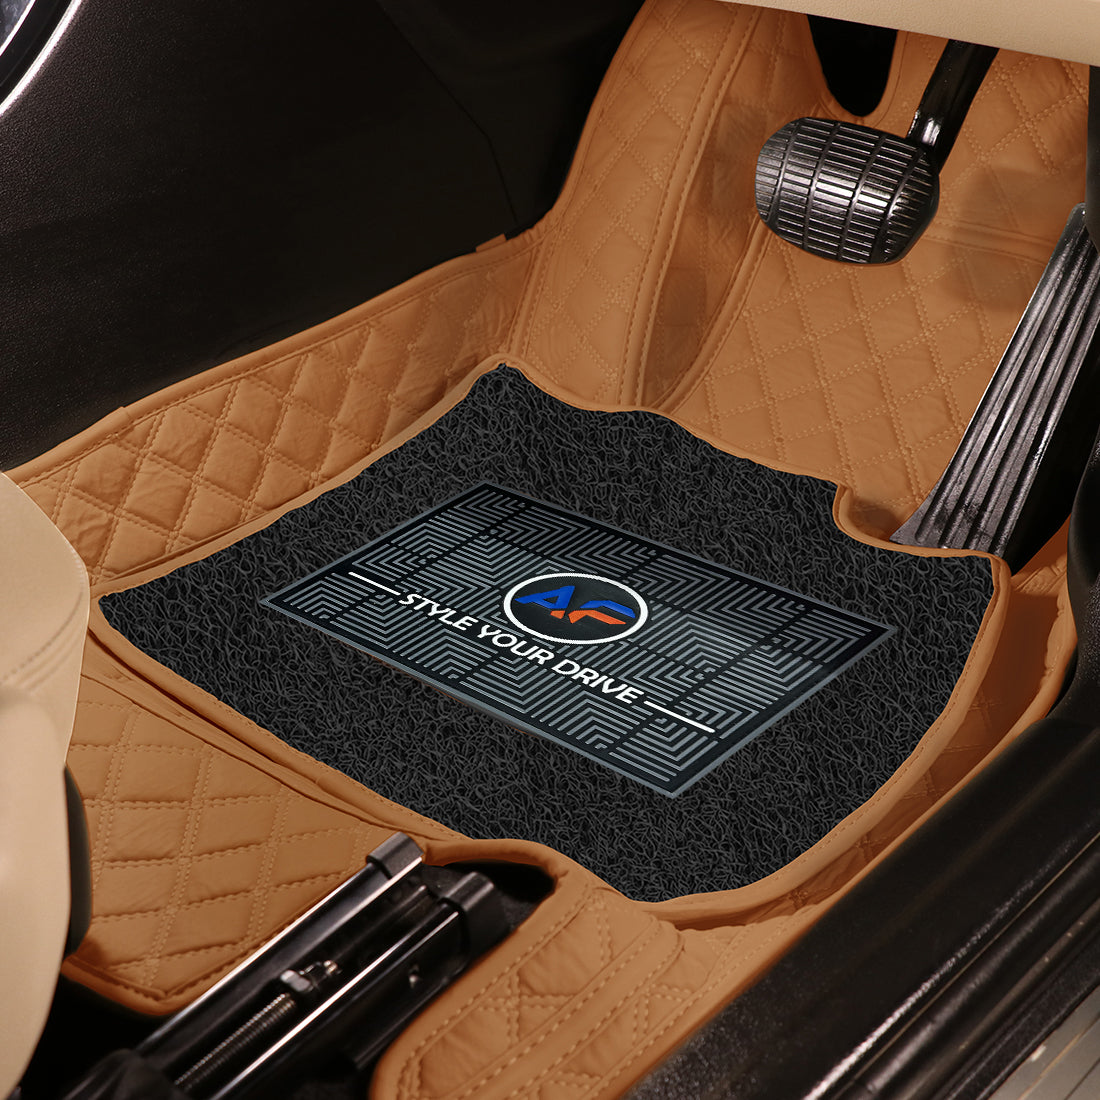 Land Rover Autobiography 2022-7D Luxury Car Mat, All Weather Proof, Anti-Skid, 100% Waterproof & Odorless with Unique Diamond Fish Design (24mm Luxury PU Leather, 2 Rows)